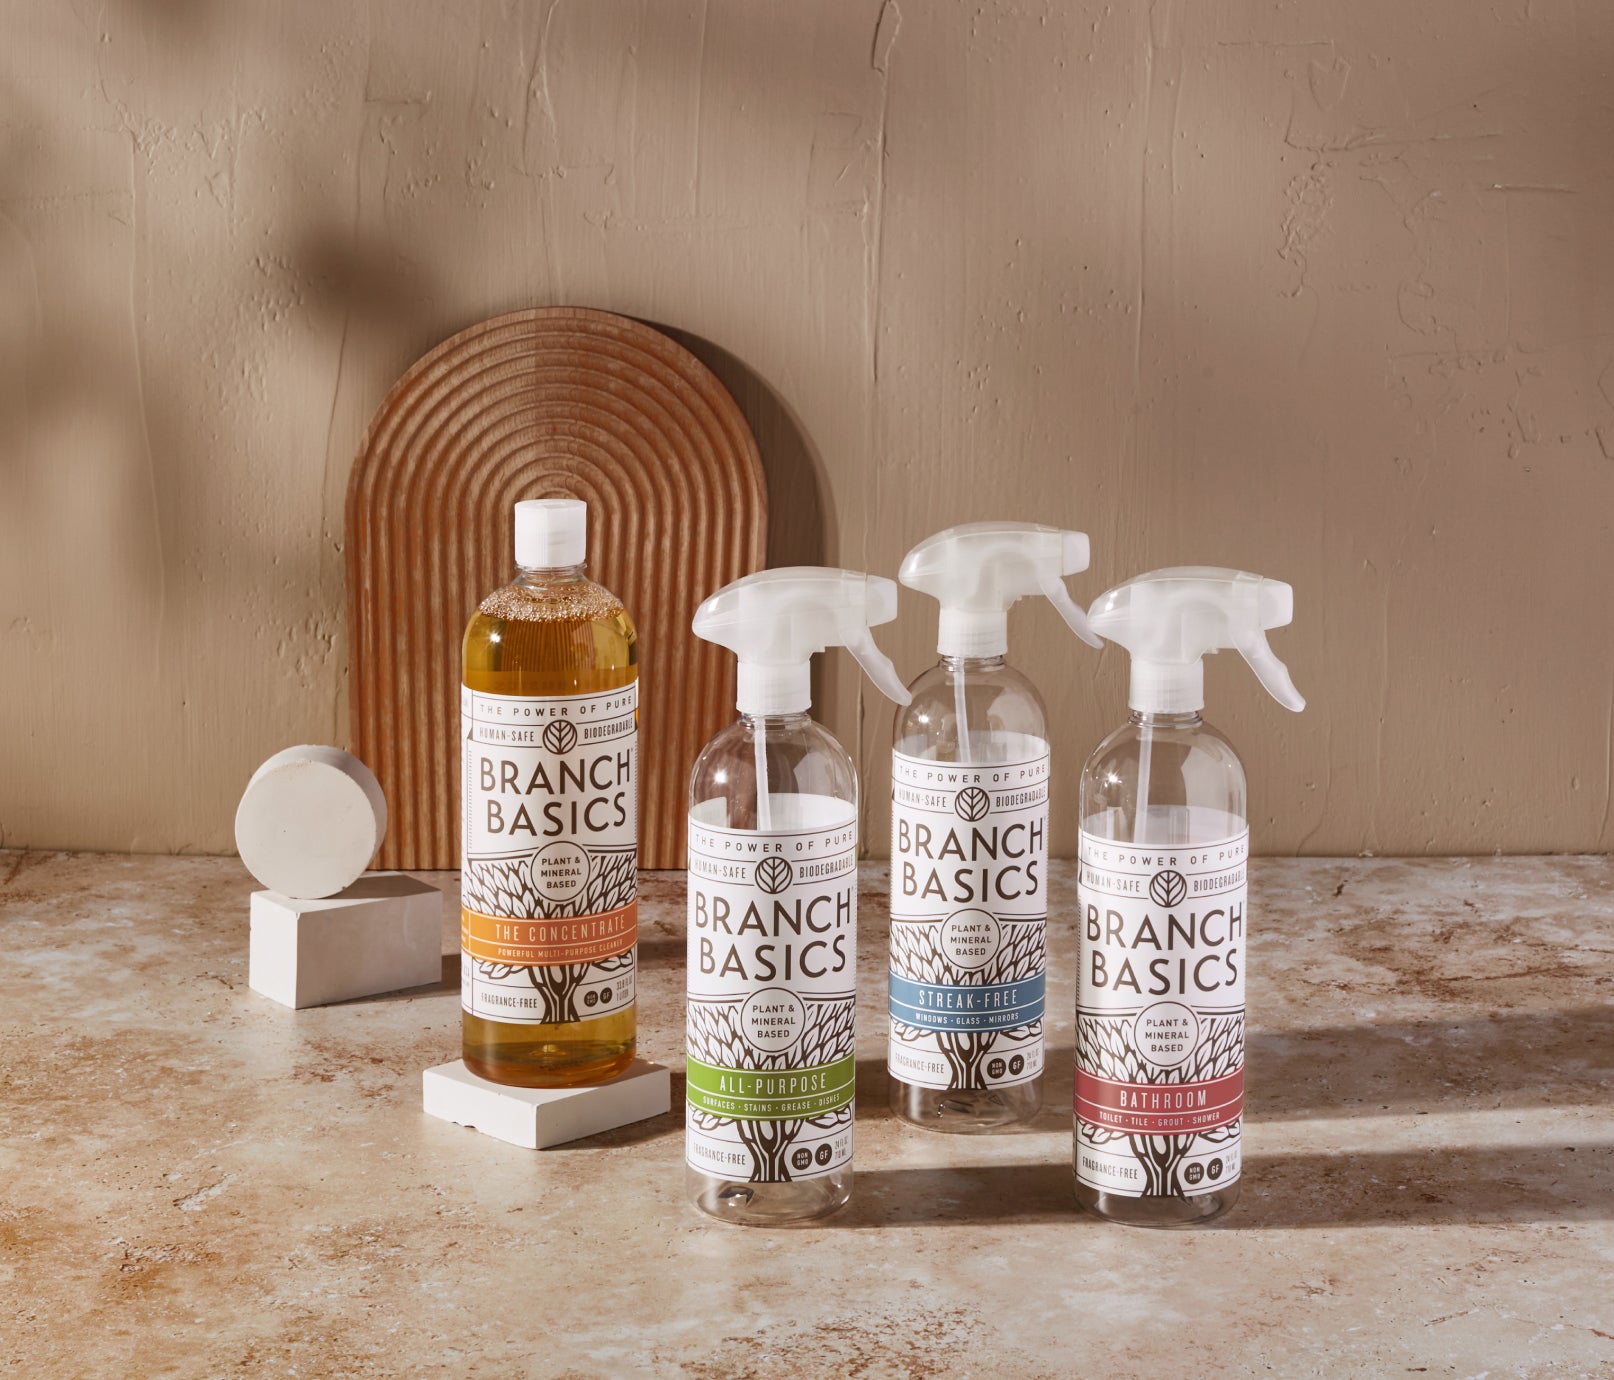 Glass Starter Kit: Non-Toxic Cleaning Products